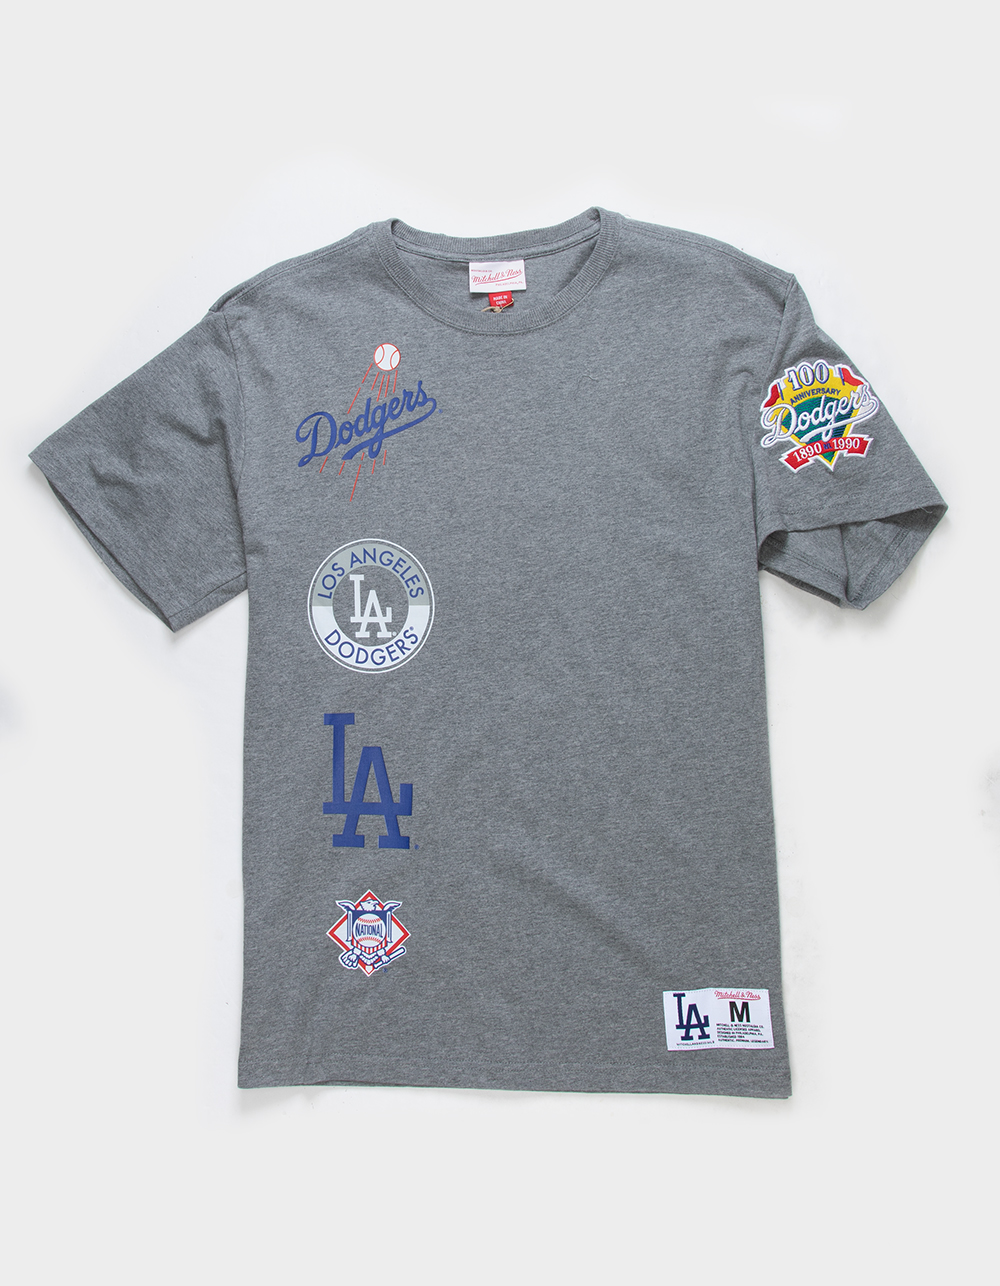 Mitchell & Ness Men's Los Angeles Dodgers Big Time T-Shirt in Gray - Size Small